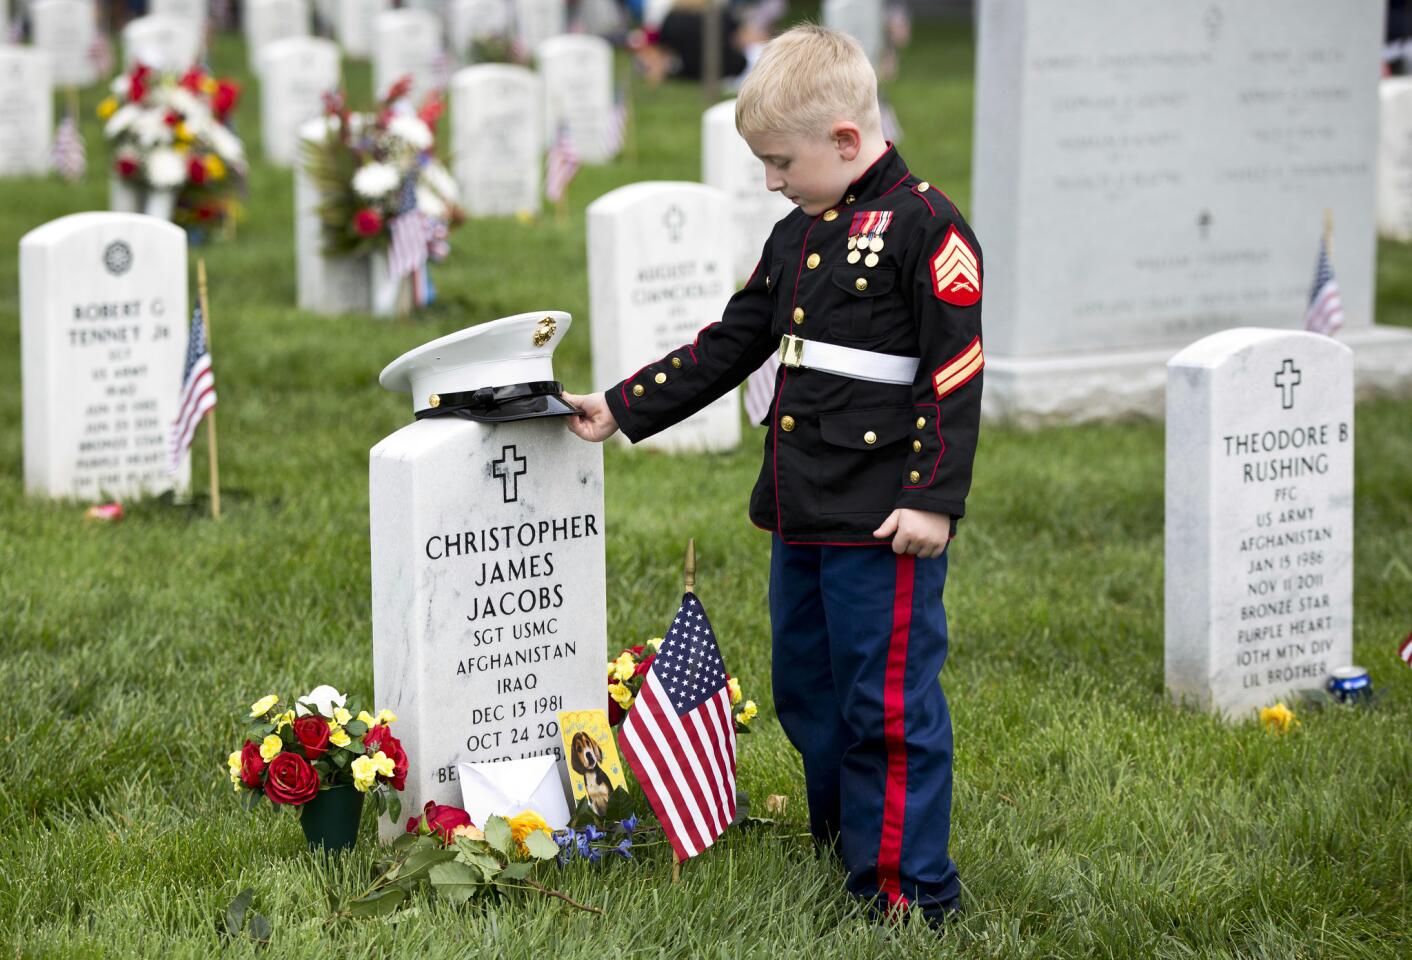 Christian Jacobs, 5, of Hertford, N.C., dressed as a Marine, stands at his father's gravestone on Memorial Day in Section 60 at Arlington National Cemetery in Arlington, Va., Monday, May 30, 2016. Christian's father Marine Sgt. Christopher James Jacobs died in a training accident in 2011. (AP Photo/Carolyn Kaster)